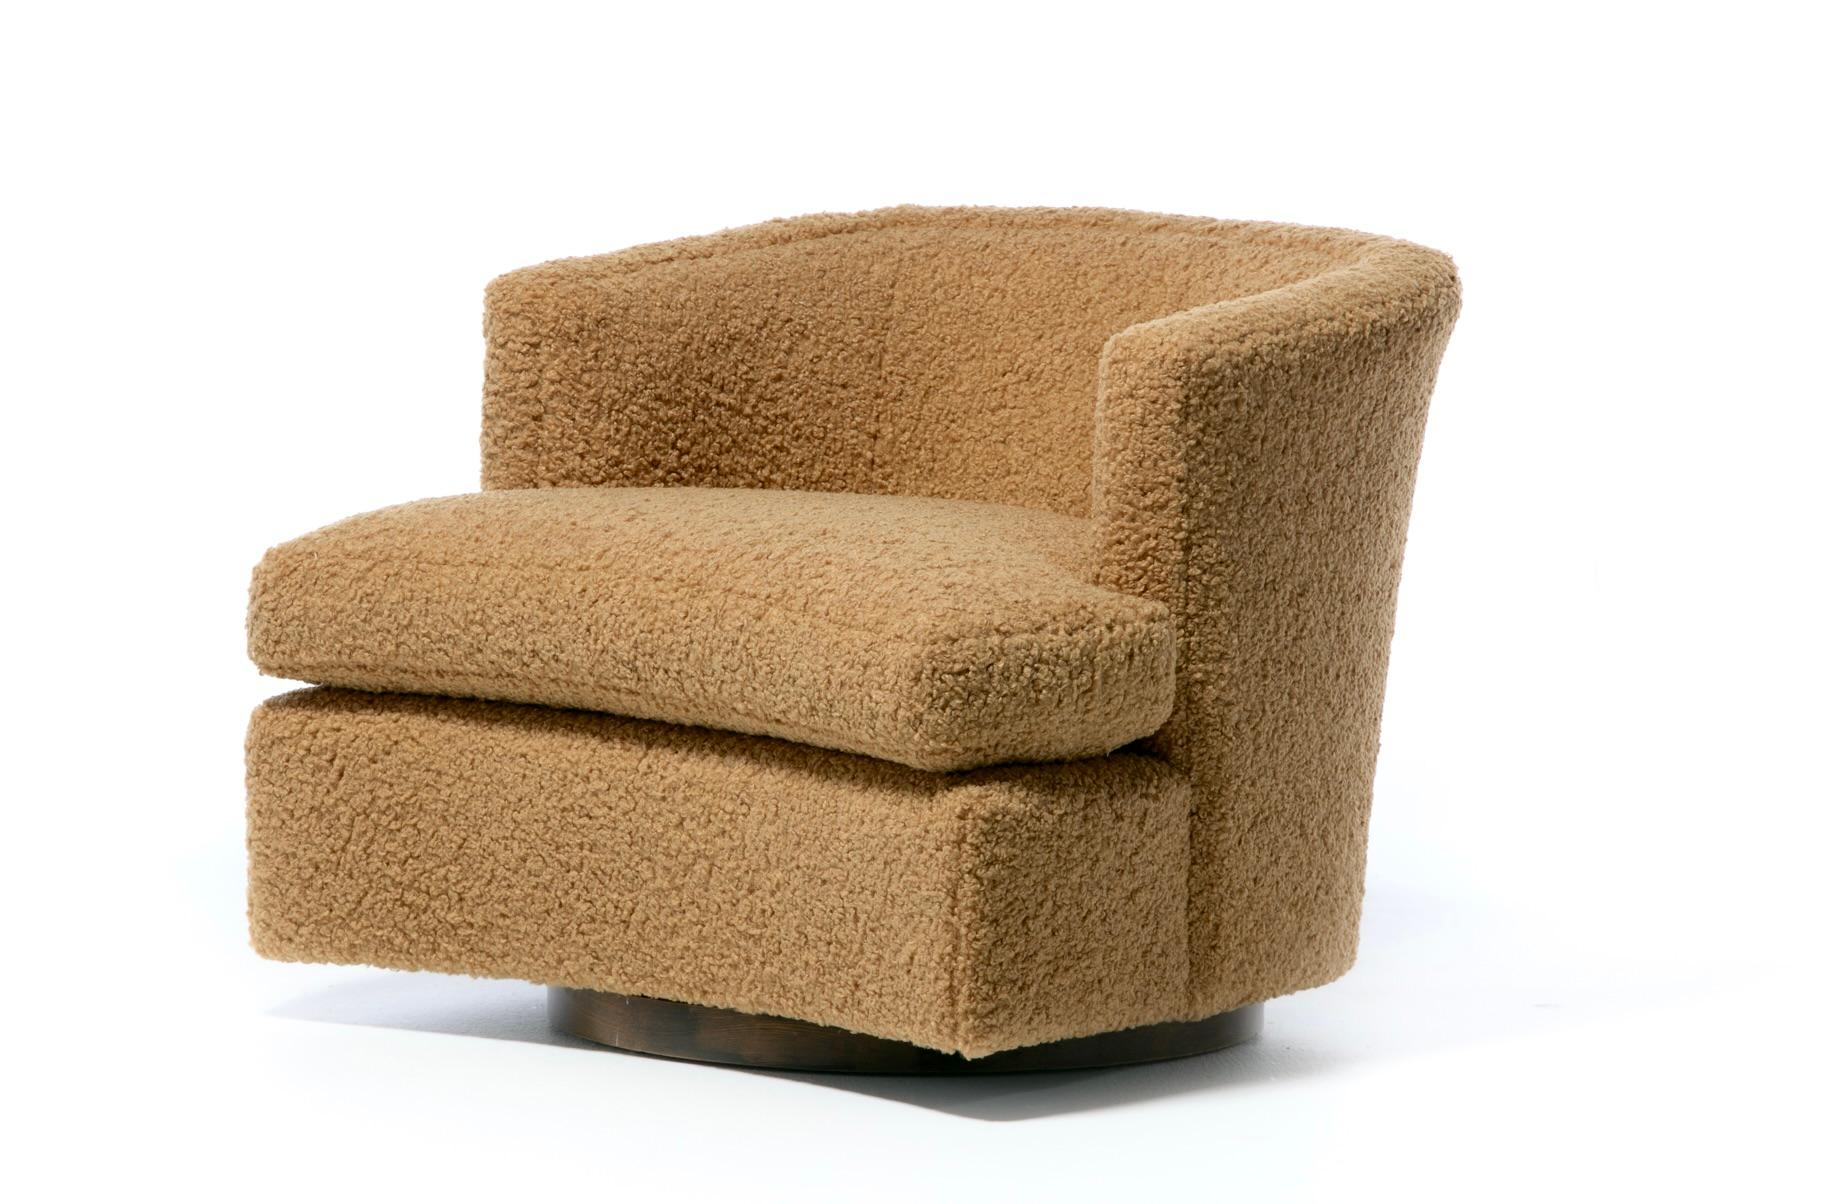 Bouclé Harvey Probber Swivel Lounge Chairs Upholstered in Camel Teddy Bear C. 1955 For Sale